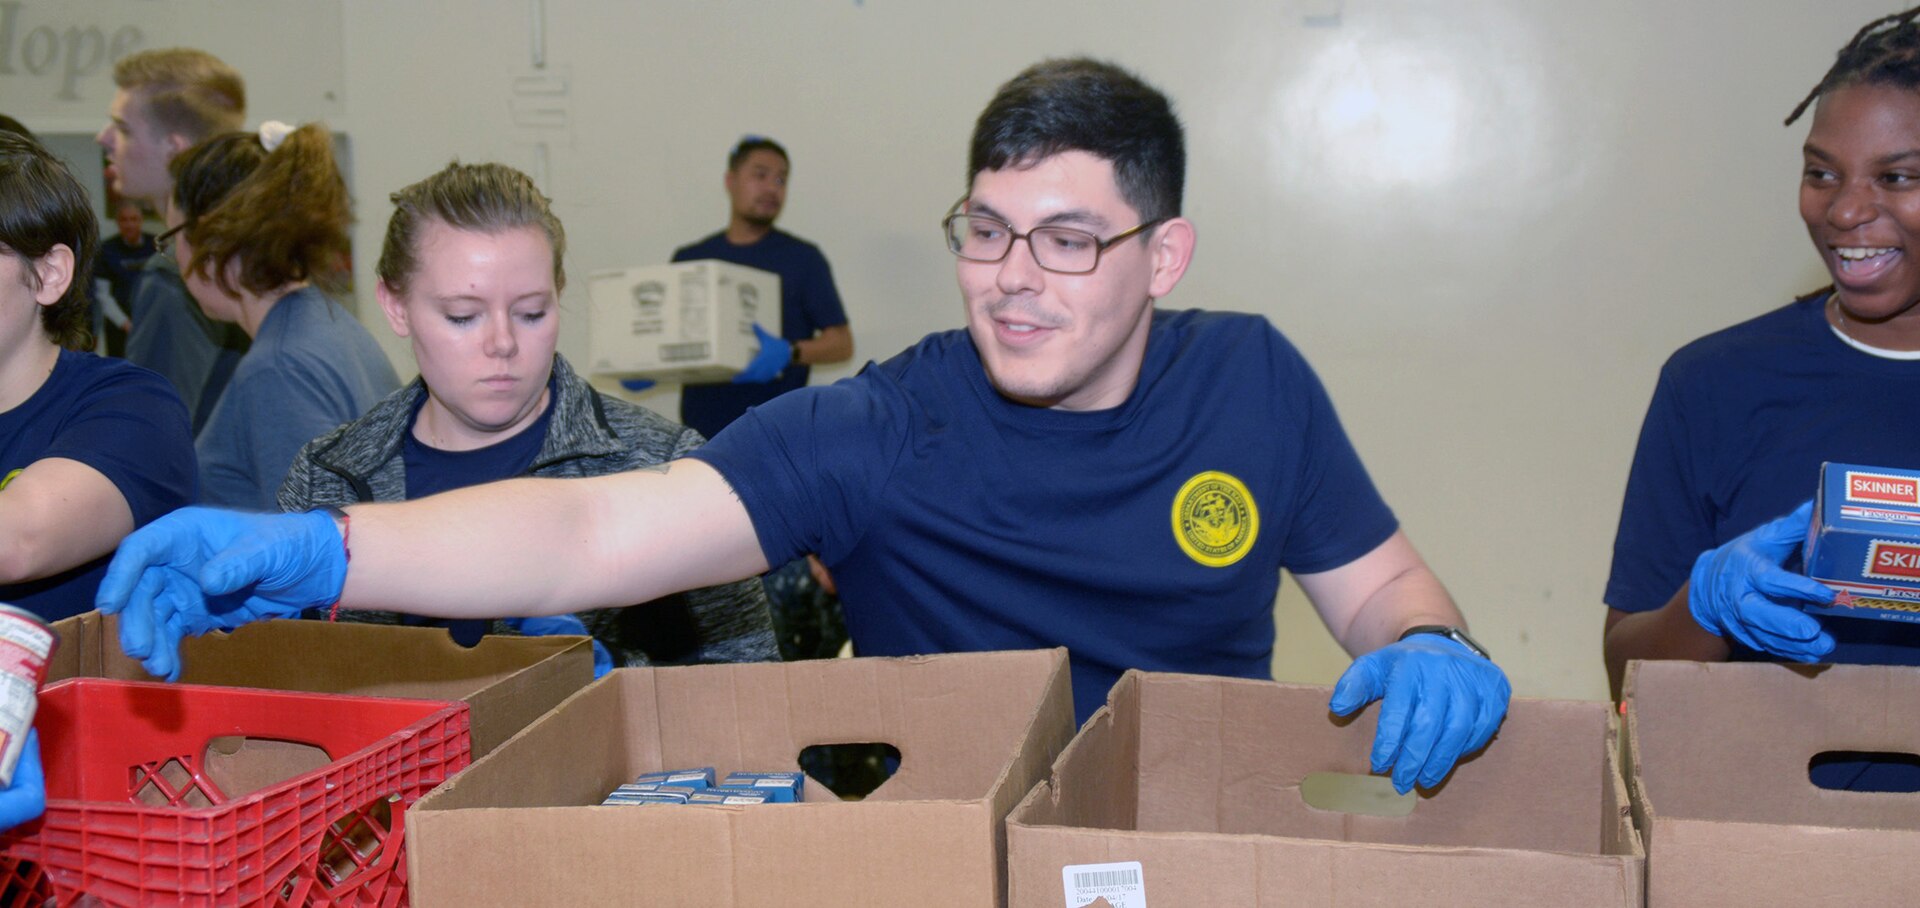 Cesar Lozano, a future Sailor in the Navy Delayed Entry Program, or DEP, volunteers at the San Antonio Food Bank.  Lozano, a 2014 graduate of Veterans Memorial High School in Brownsville, participated in the bi-weekly DEP meeting hosted by Navy Recruiting Station Northeast San Antonio.  The purpose of the volunteerism was to instill the “Whole Sailor Concept”.  Lozano will attend recruit training in Great Lakes, Mich. in April with follow-on training as an aviation structural mechanic.